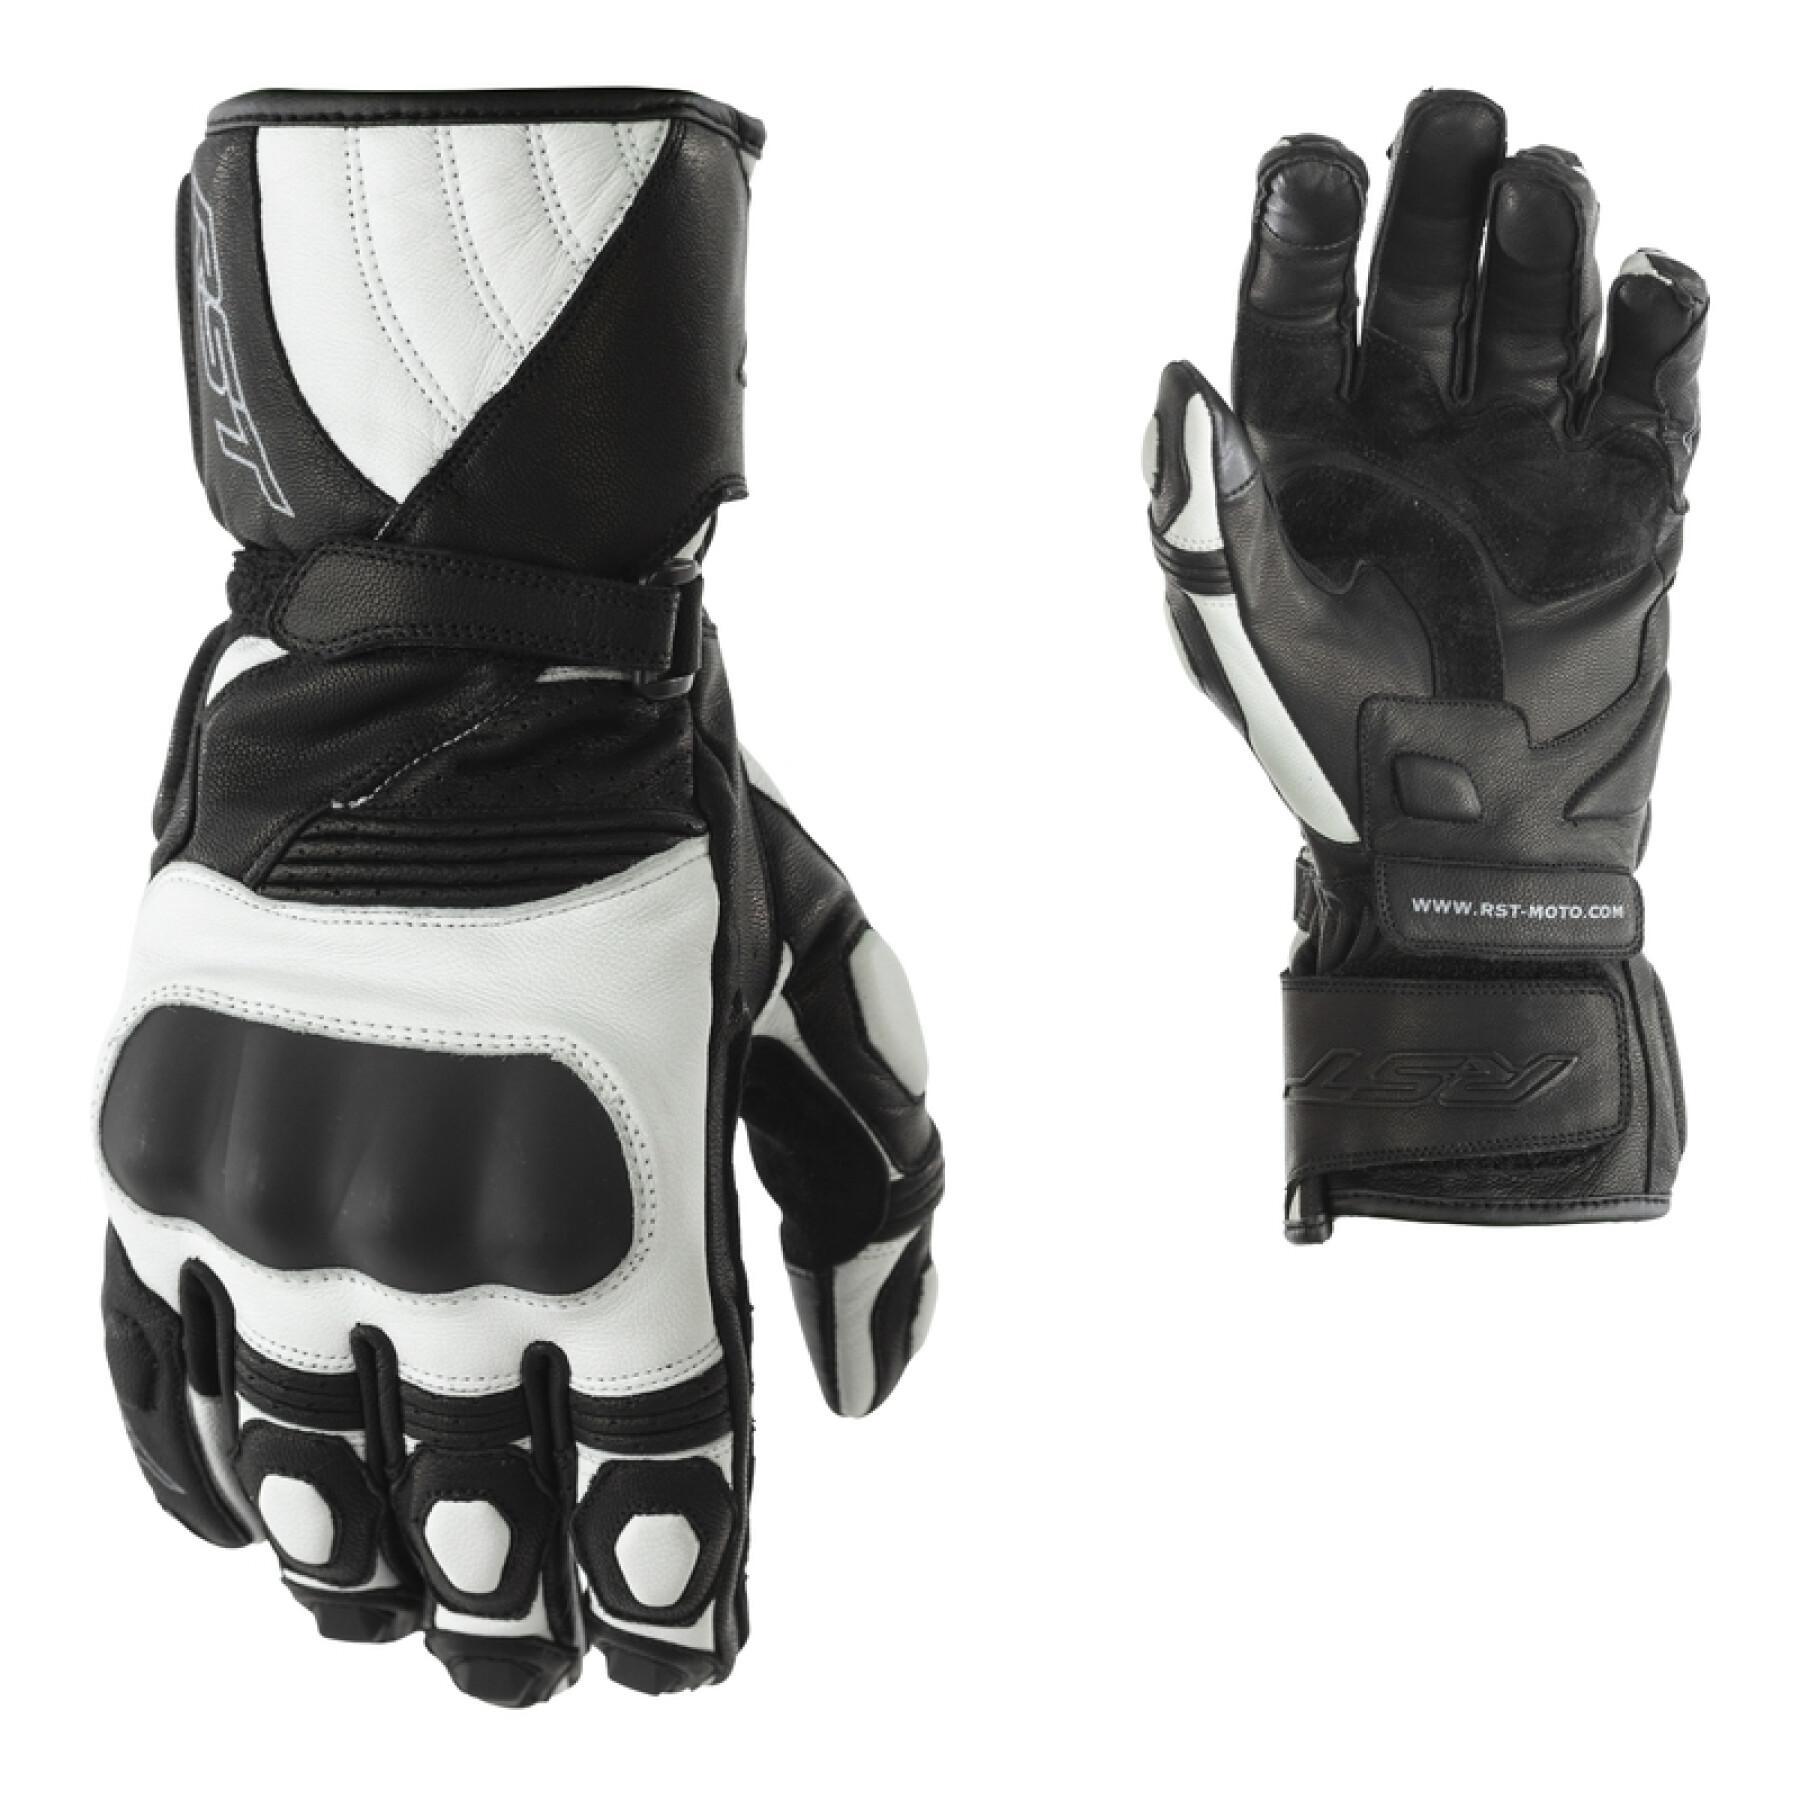 All season motorcycle gloves RST GT CE